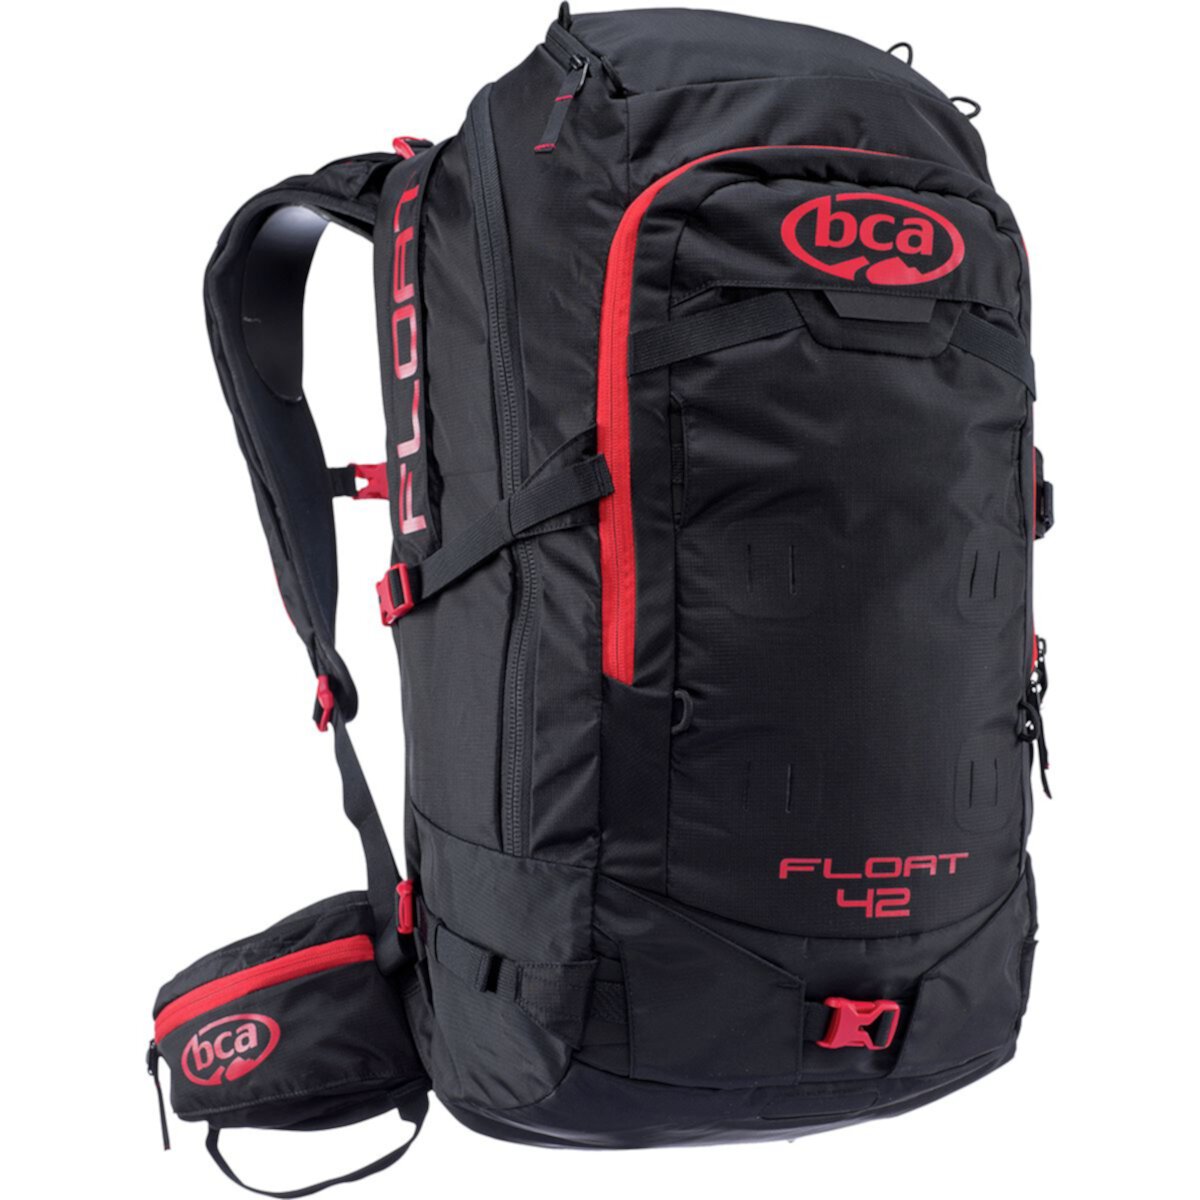 Backcountry Access Float 42 Airbag Backpack Backcountry Access